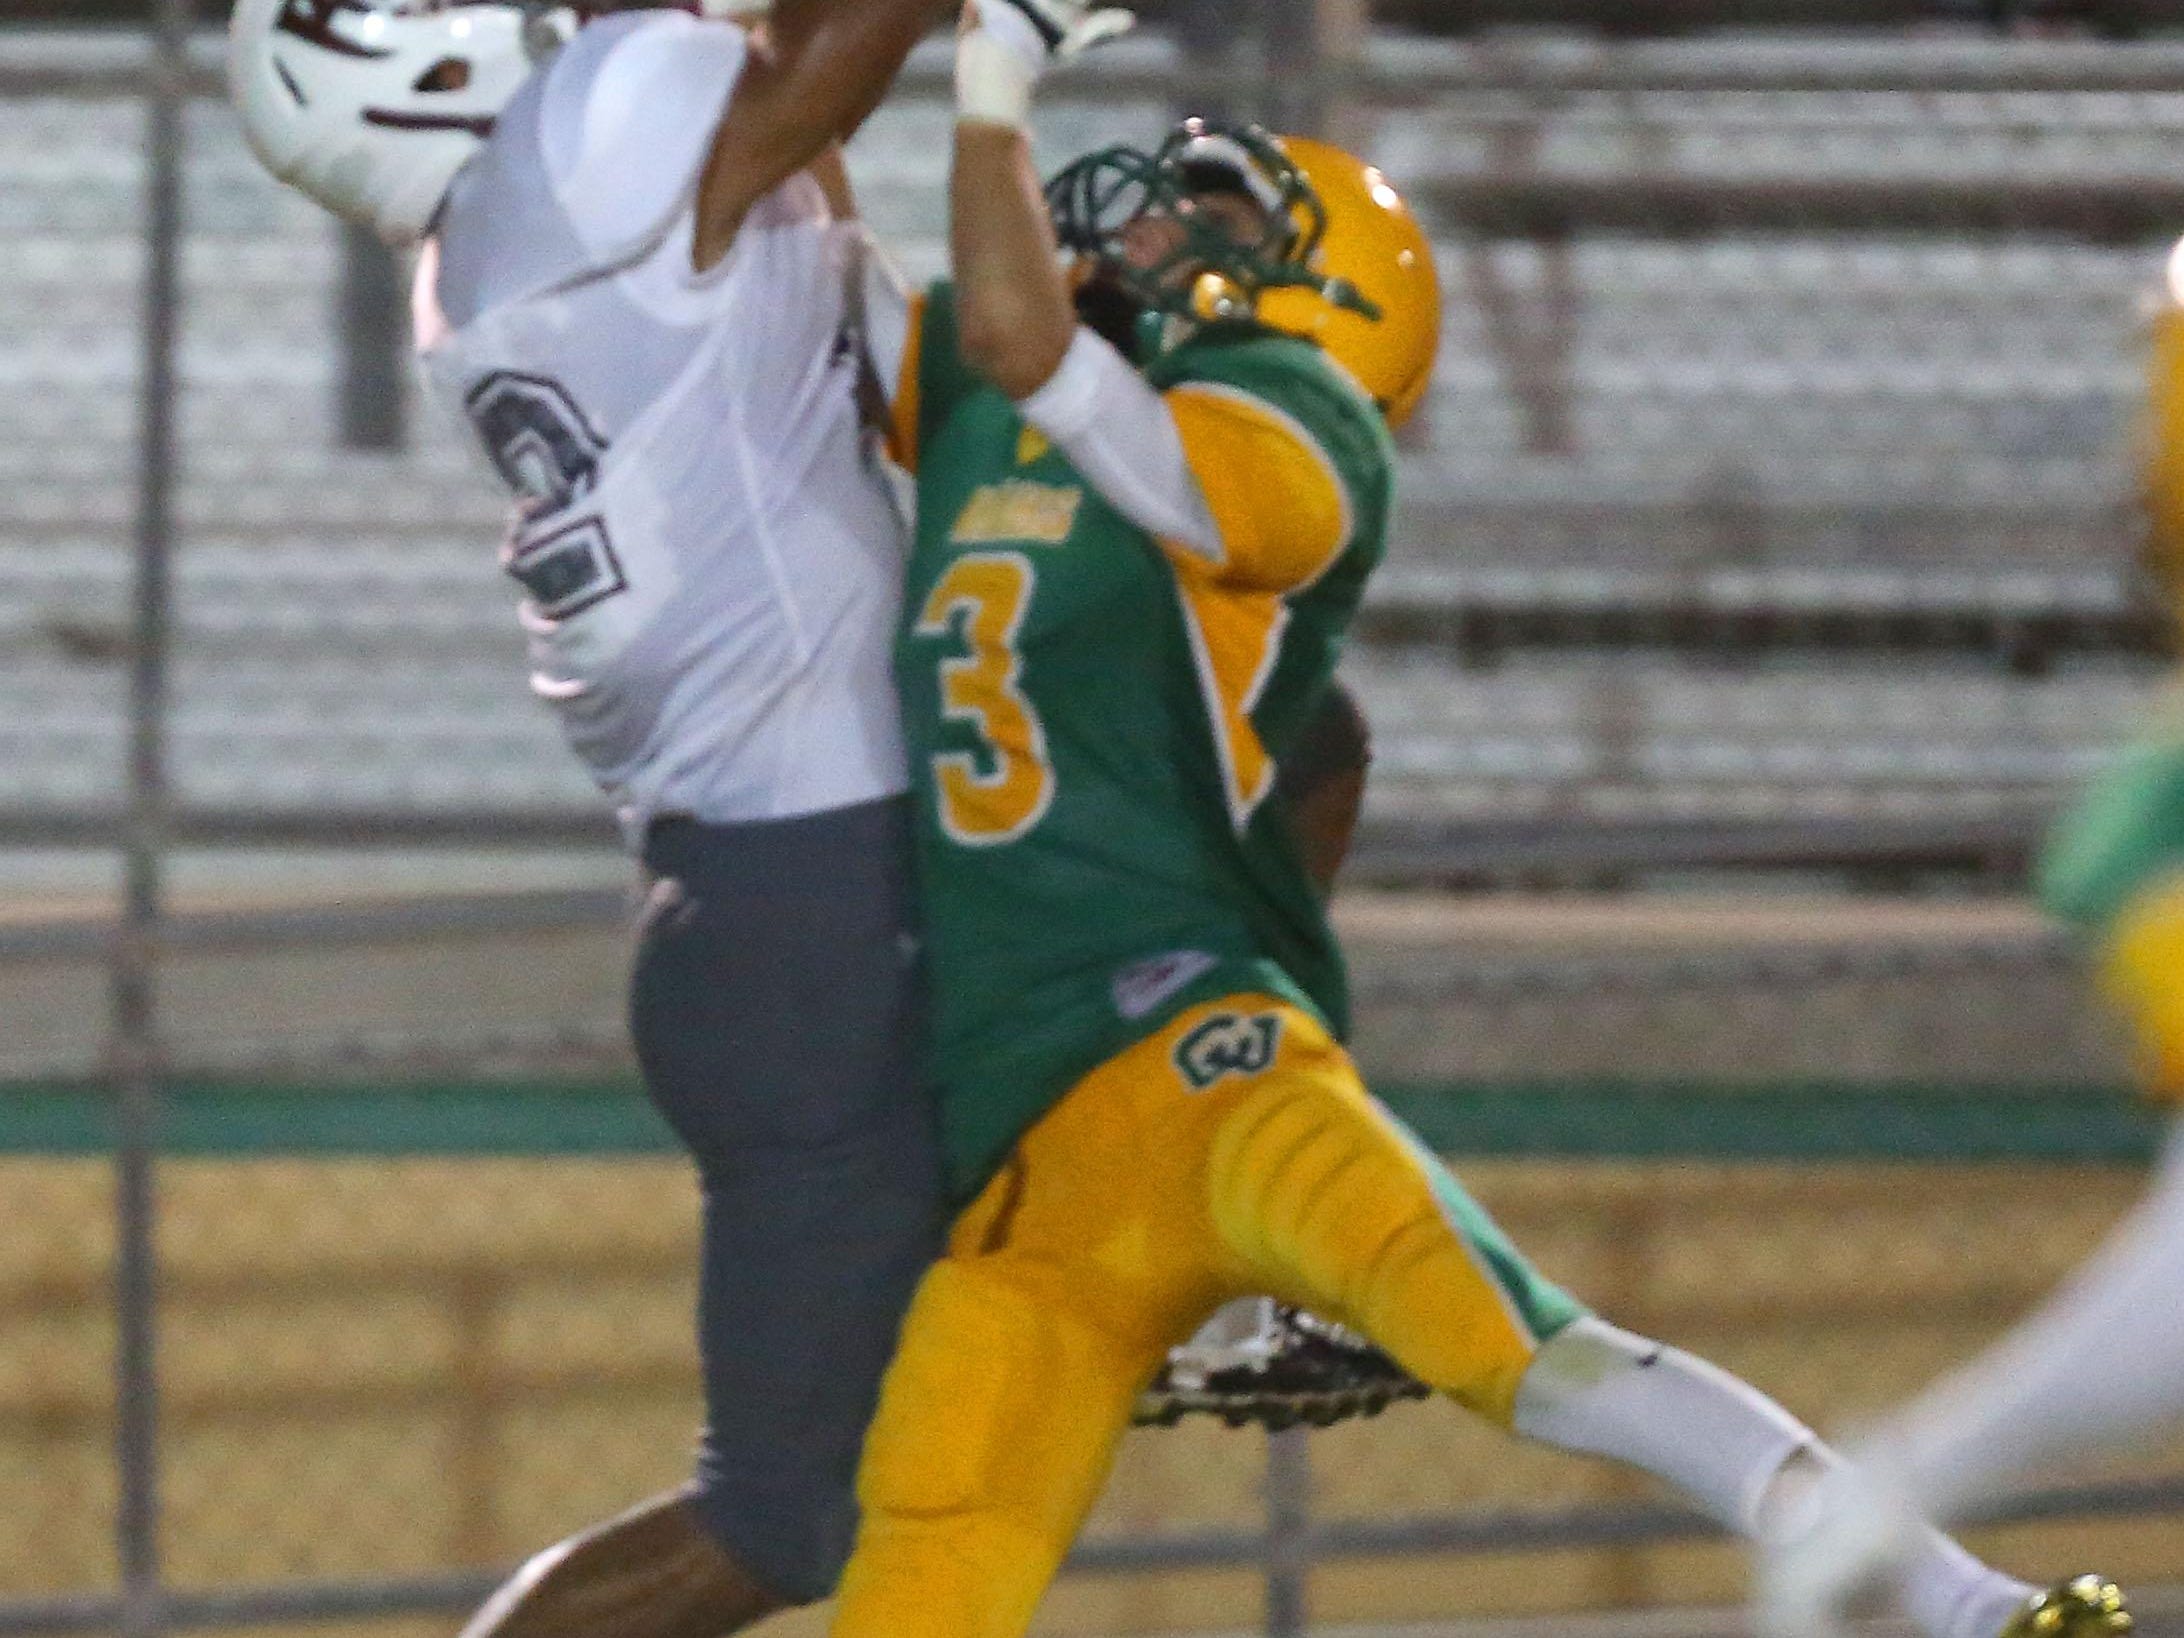 Daryn Evans hauls in a pass for Rancho Mirage as Carl Ortiz of Coachella defends, Friday, August 28, 2015.